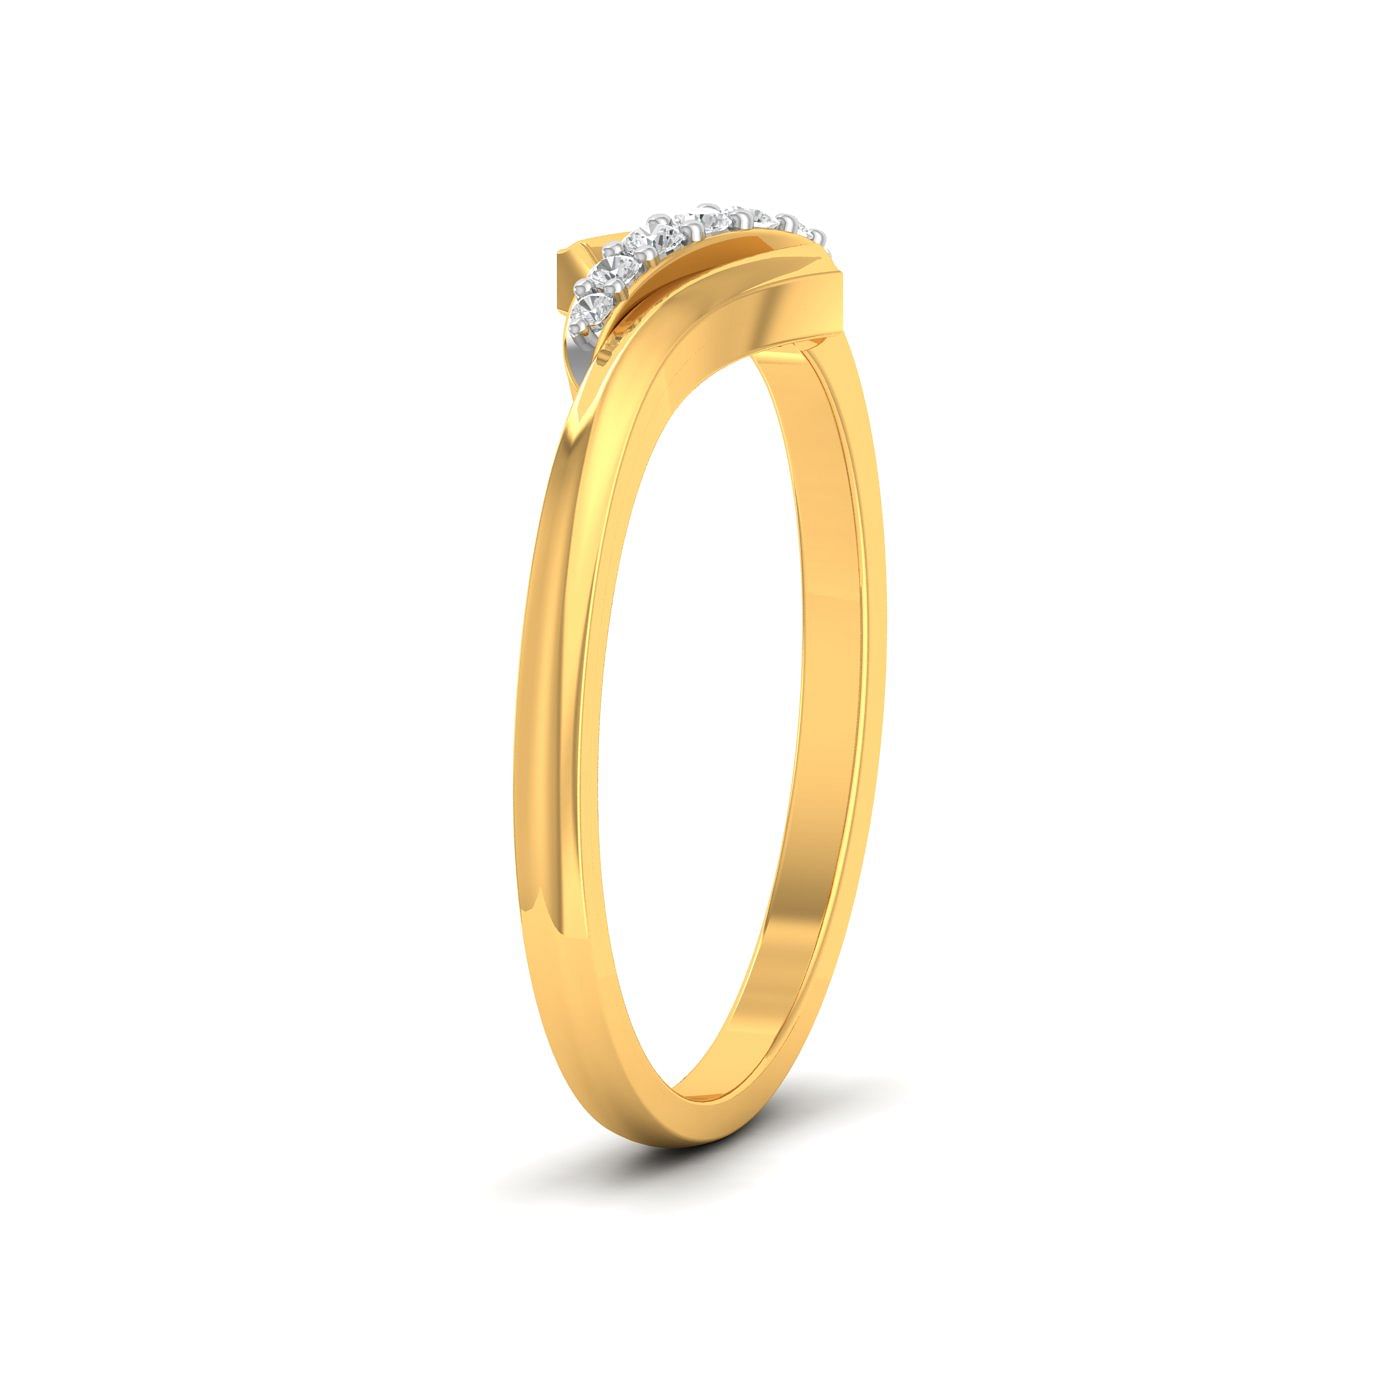 Juliette Daily Wear Diamond Ring With Yellow Gold For Women